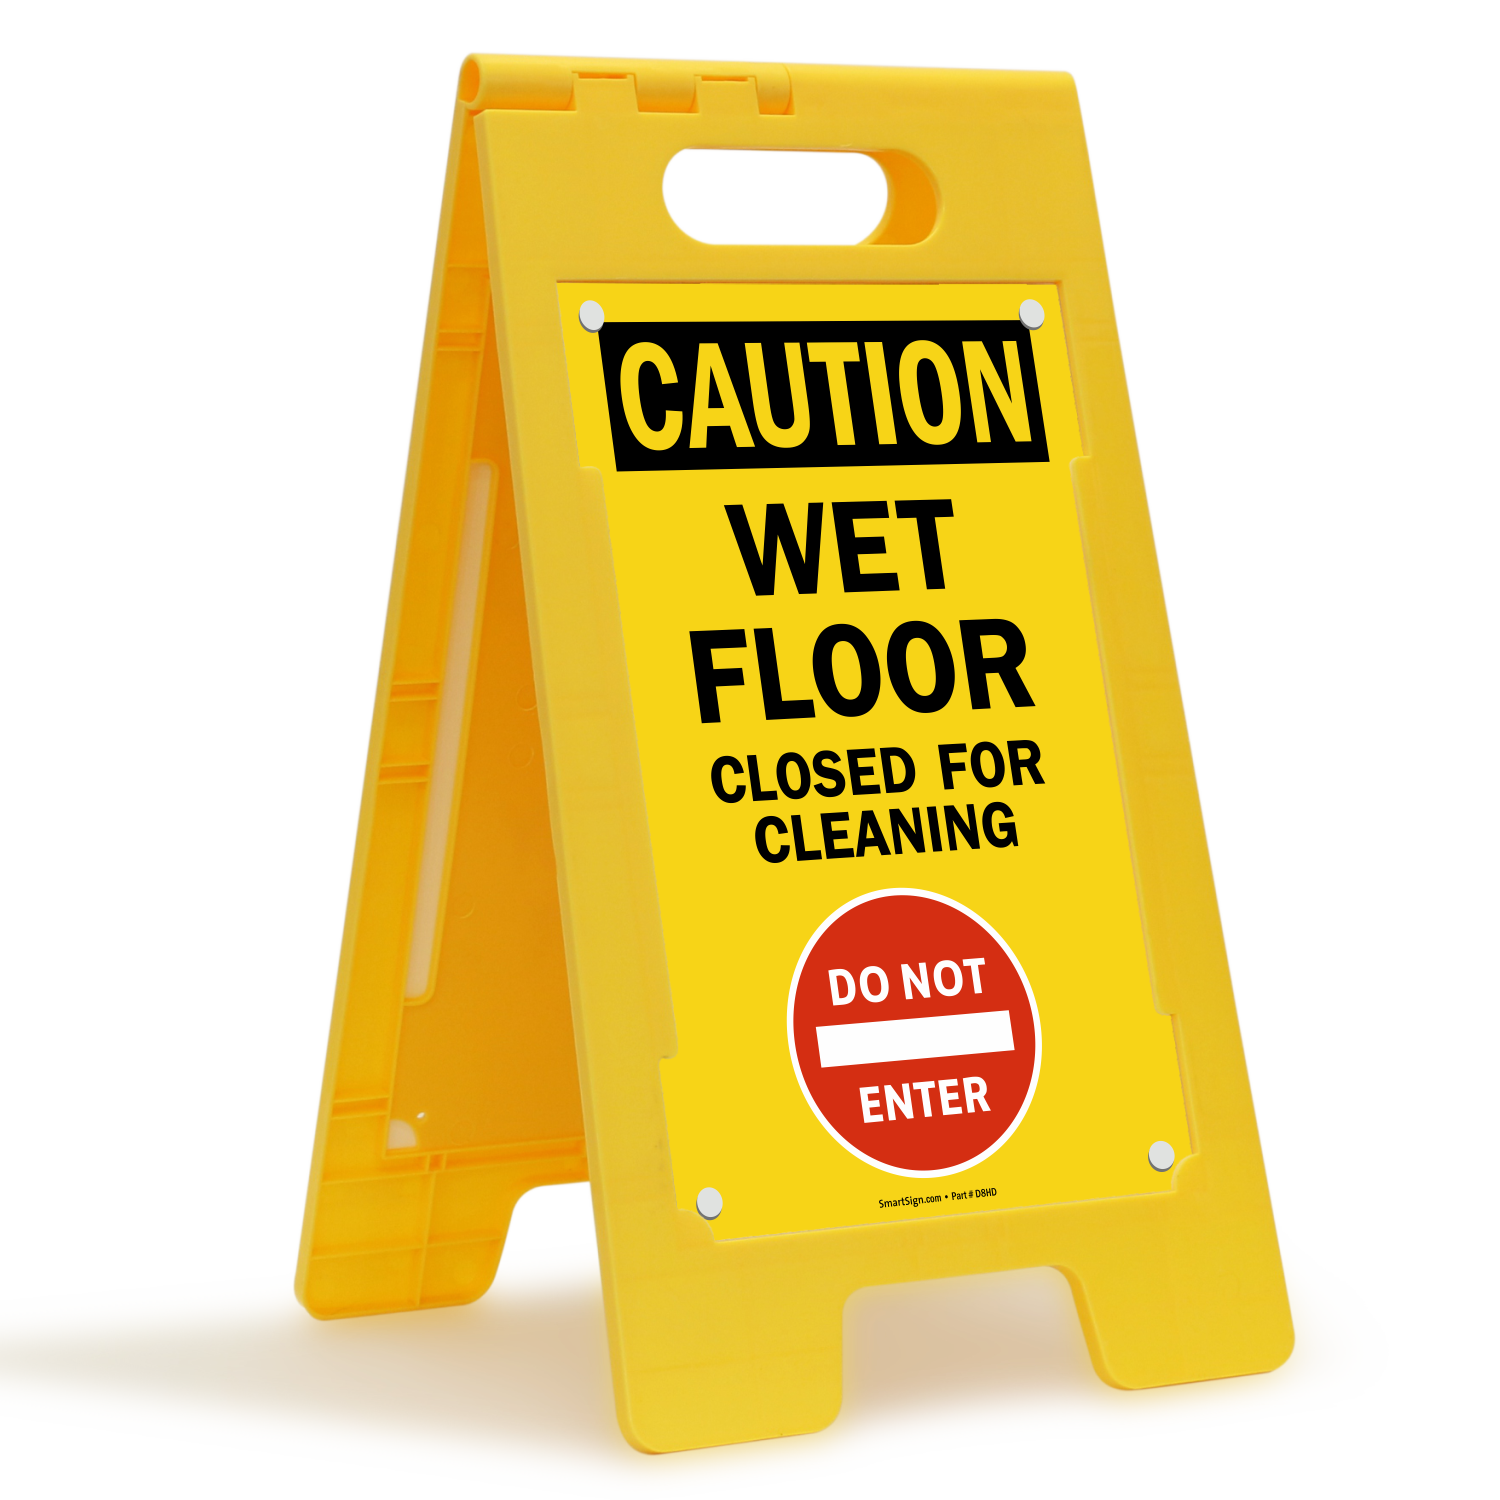 Caution Wet Floor Closed For Cleaning Standing Floor Sign, SKU: SF-0301